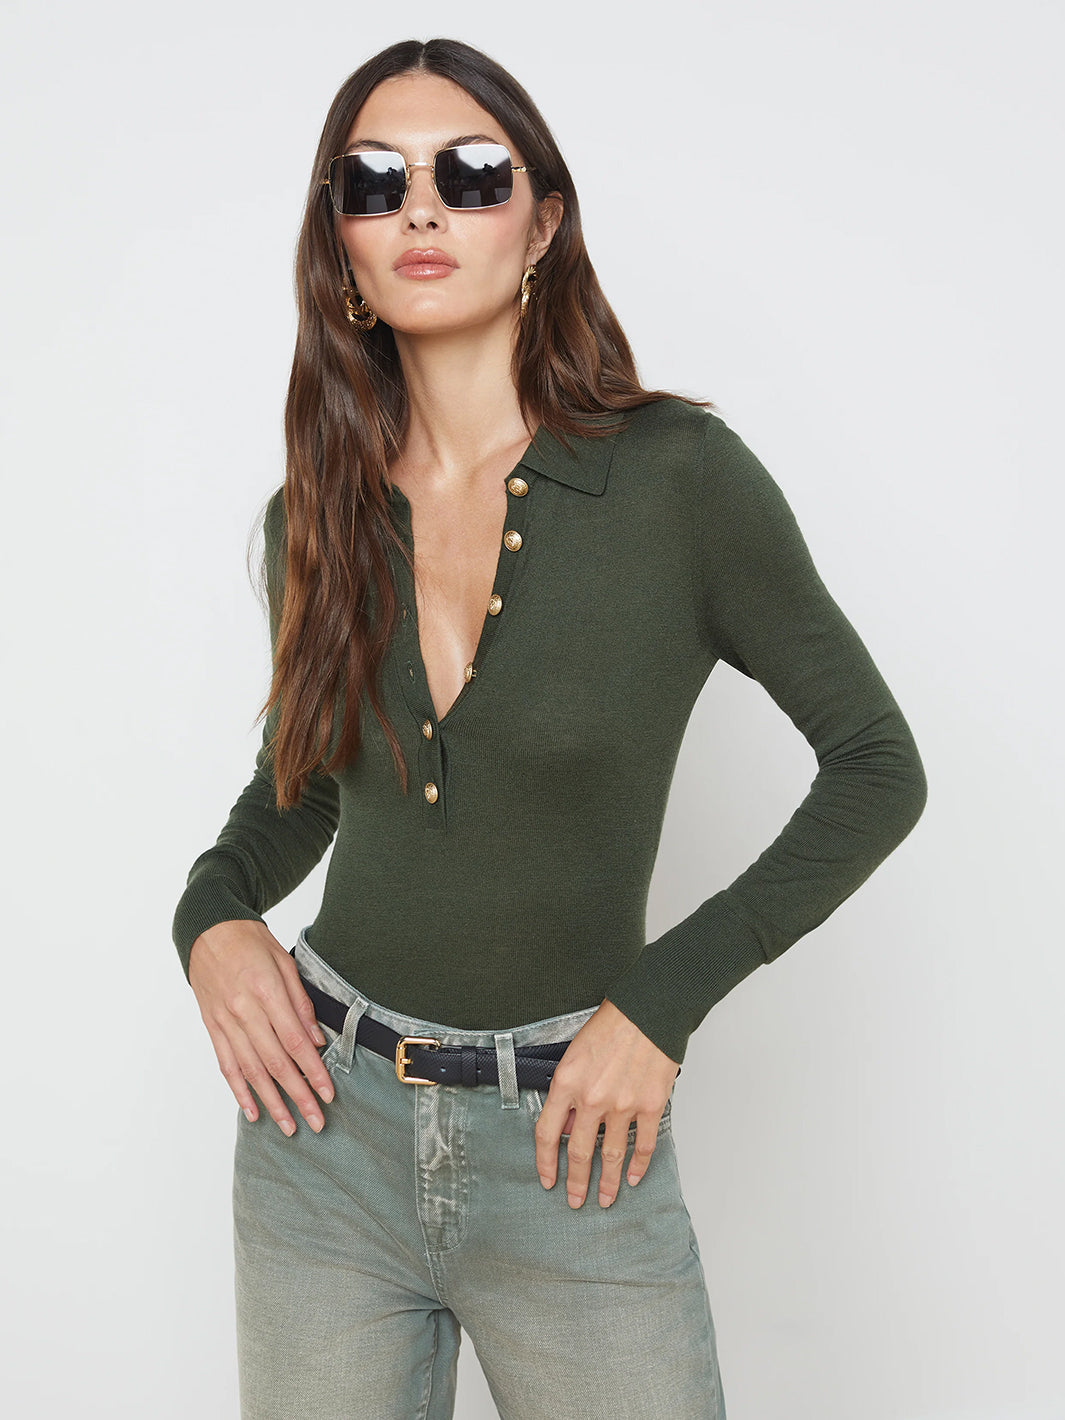 Sterling Sweater in Army